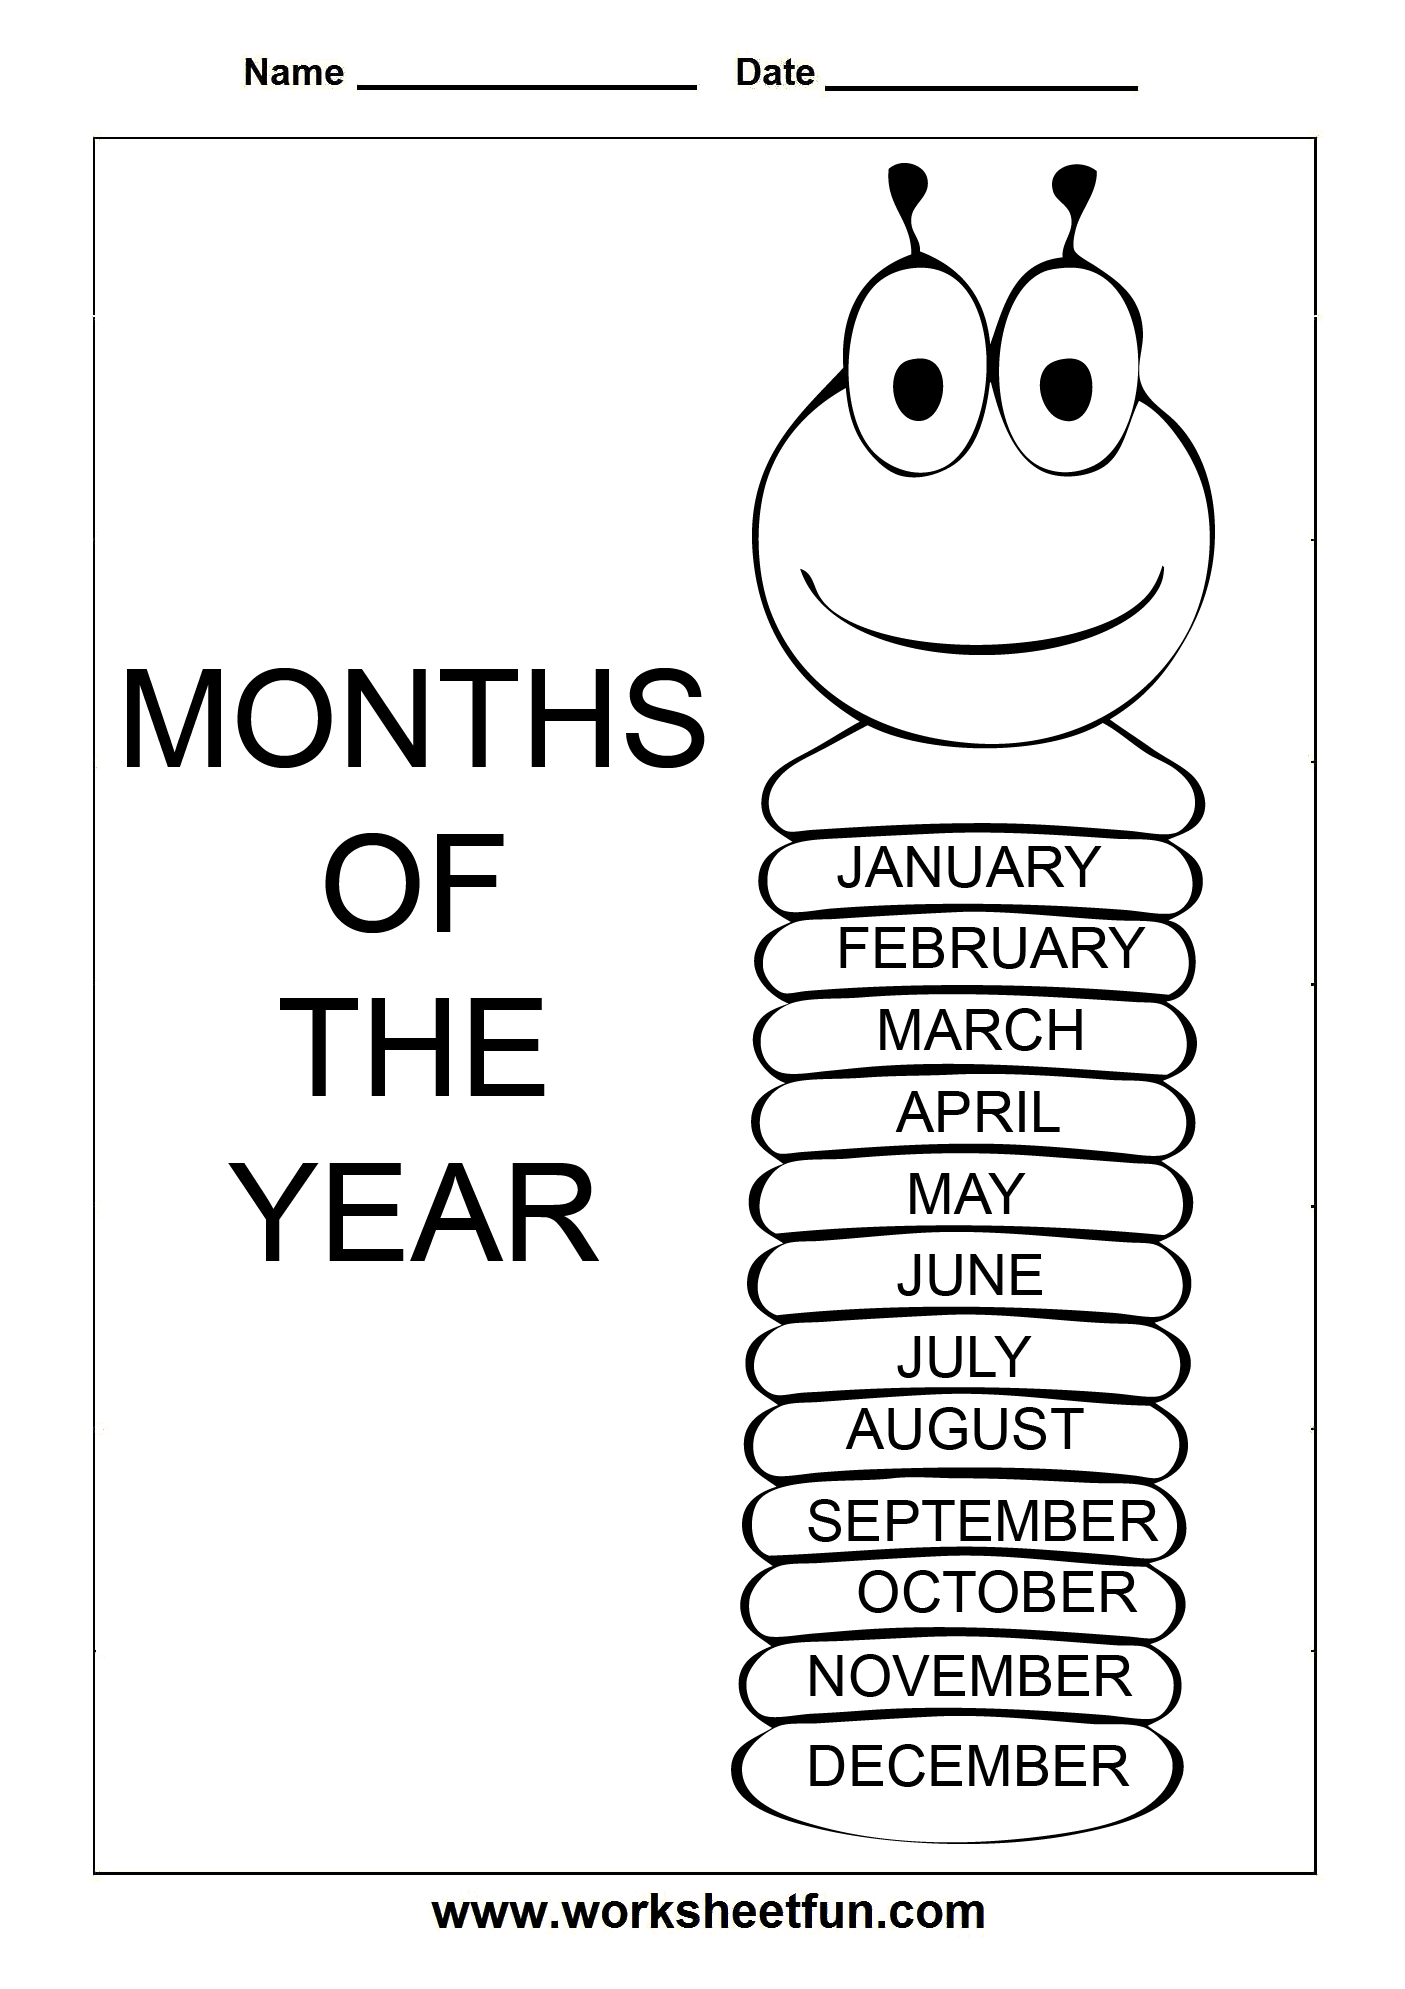 Days Months Years Worksheets